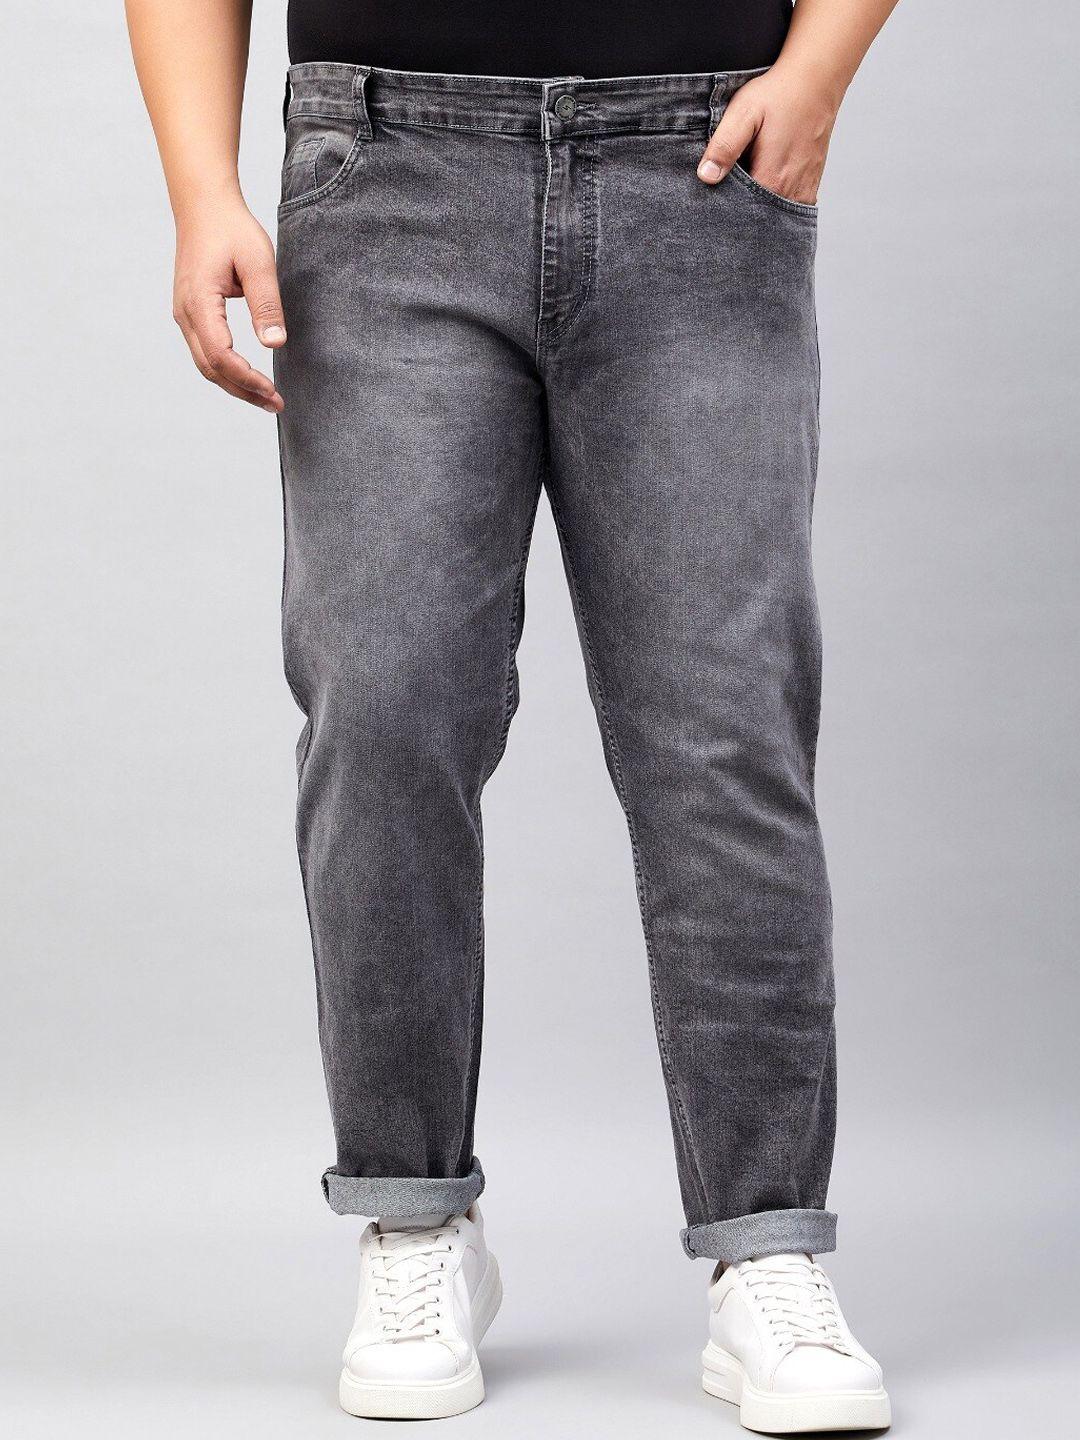 STUDIO NEXX Men Tapered Fit Clean Look Light Fade Cotton Jeans